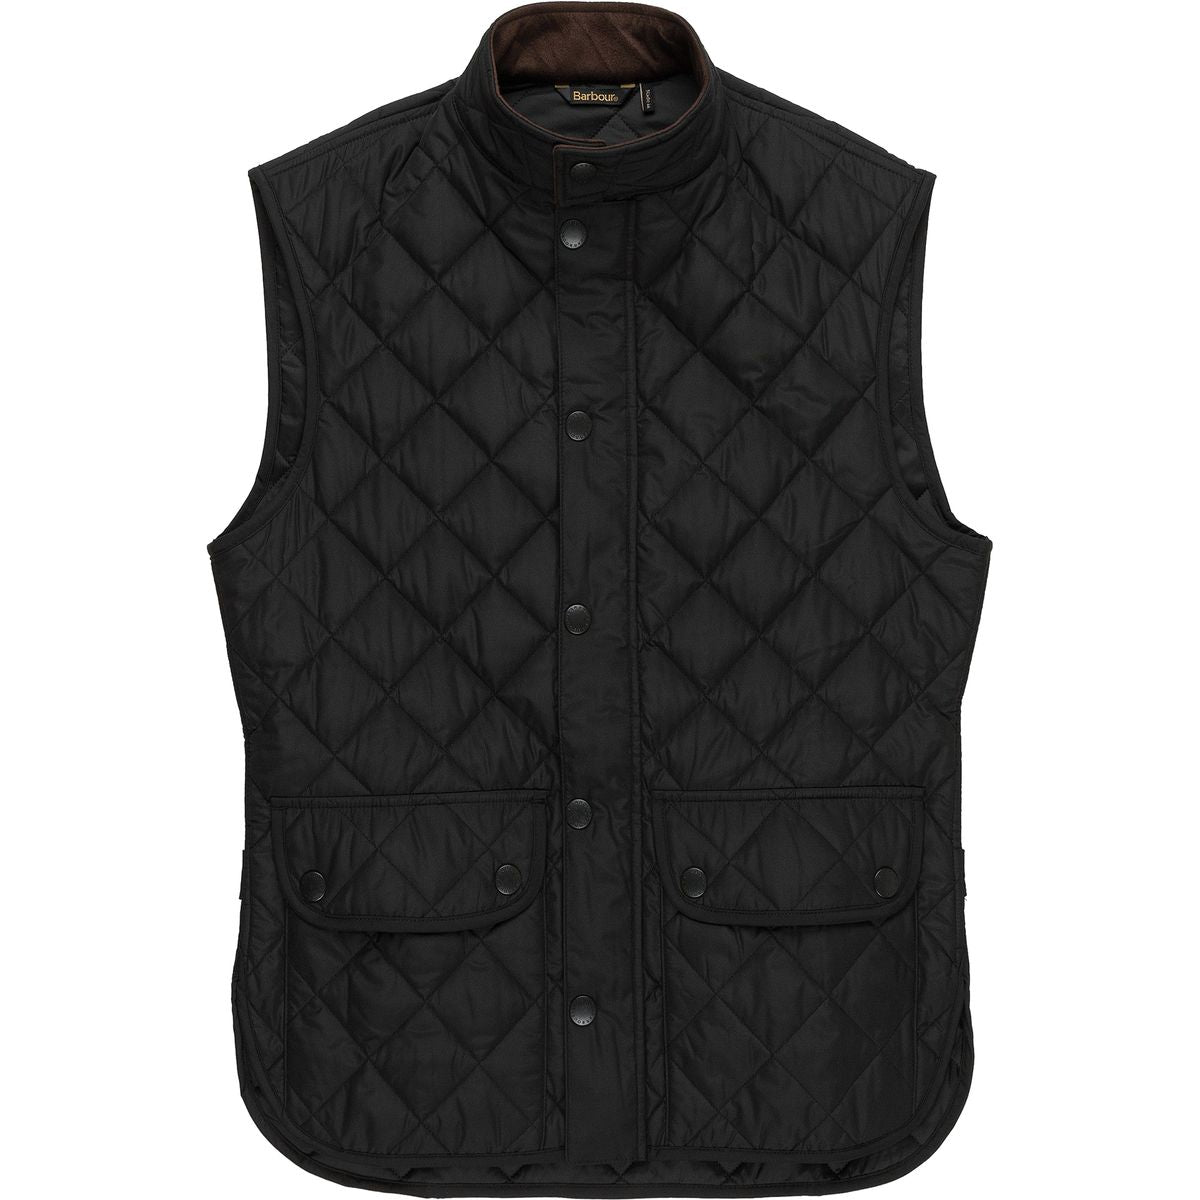 Barbour Lowerdale Quilted Vest - Black